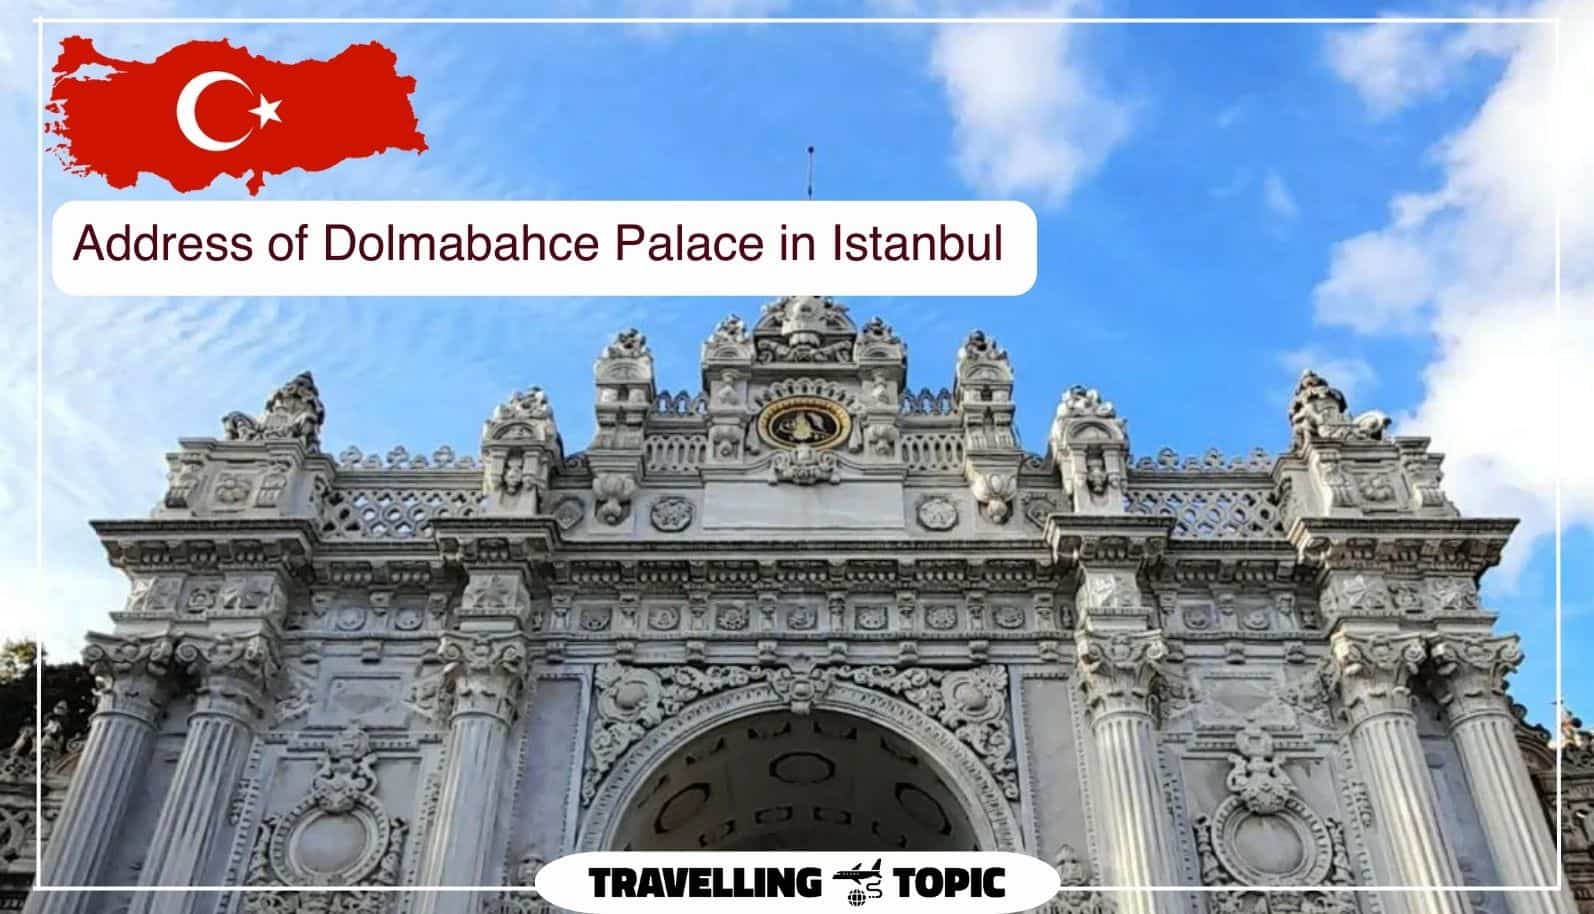 Address of Dolmabahce Palace in Istanbul